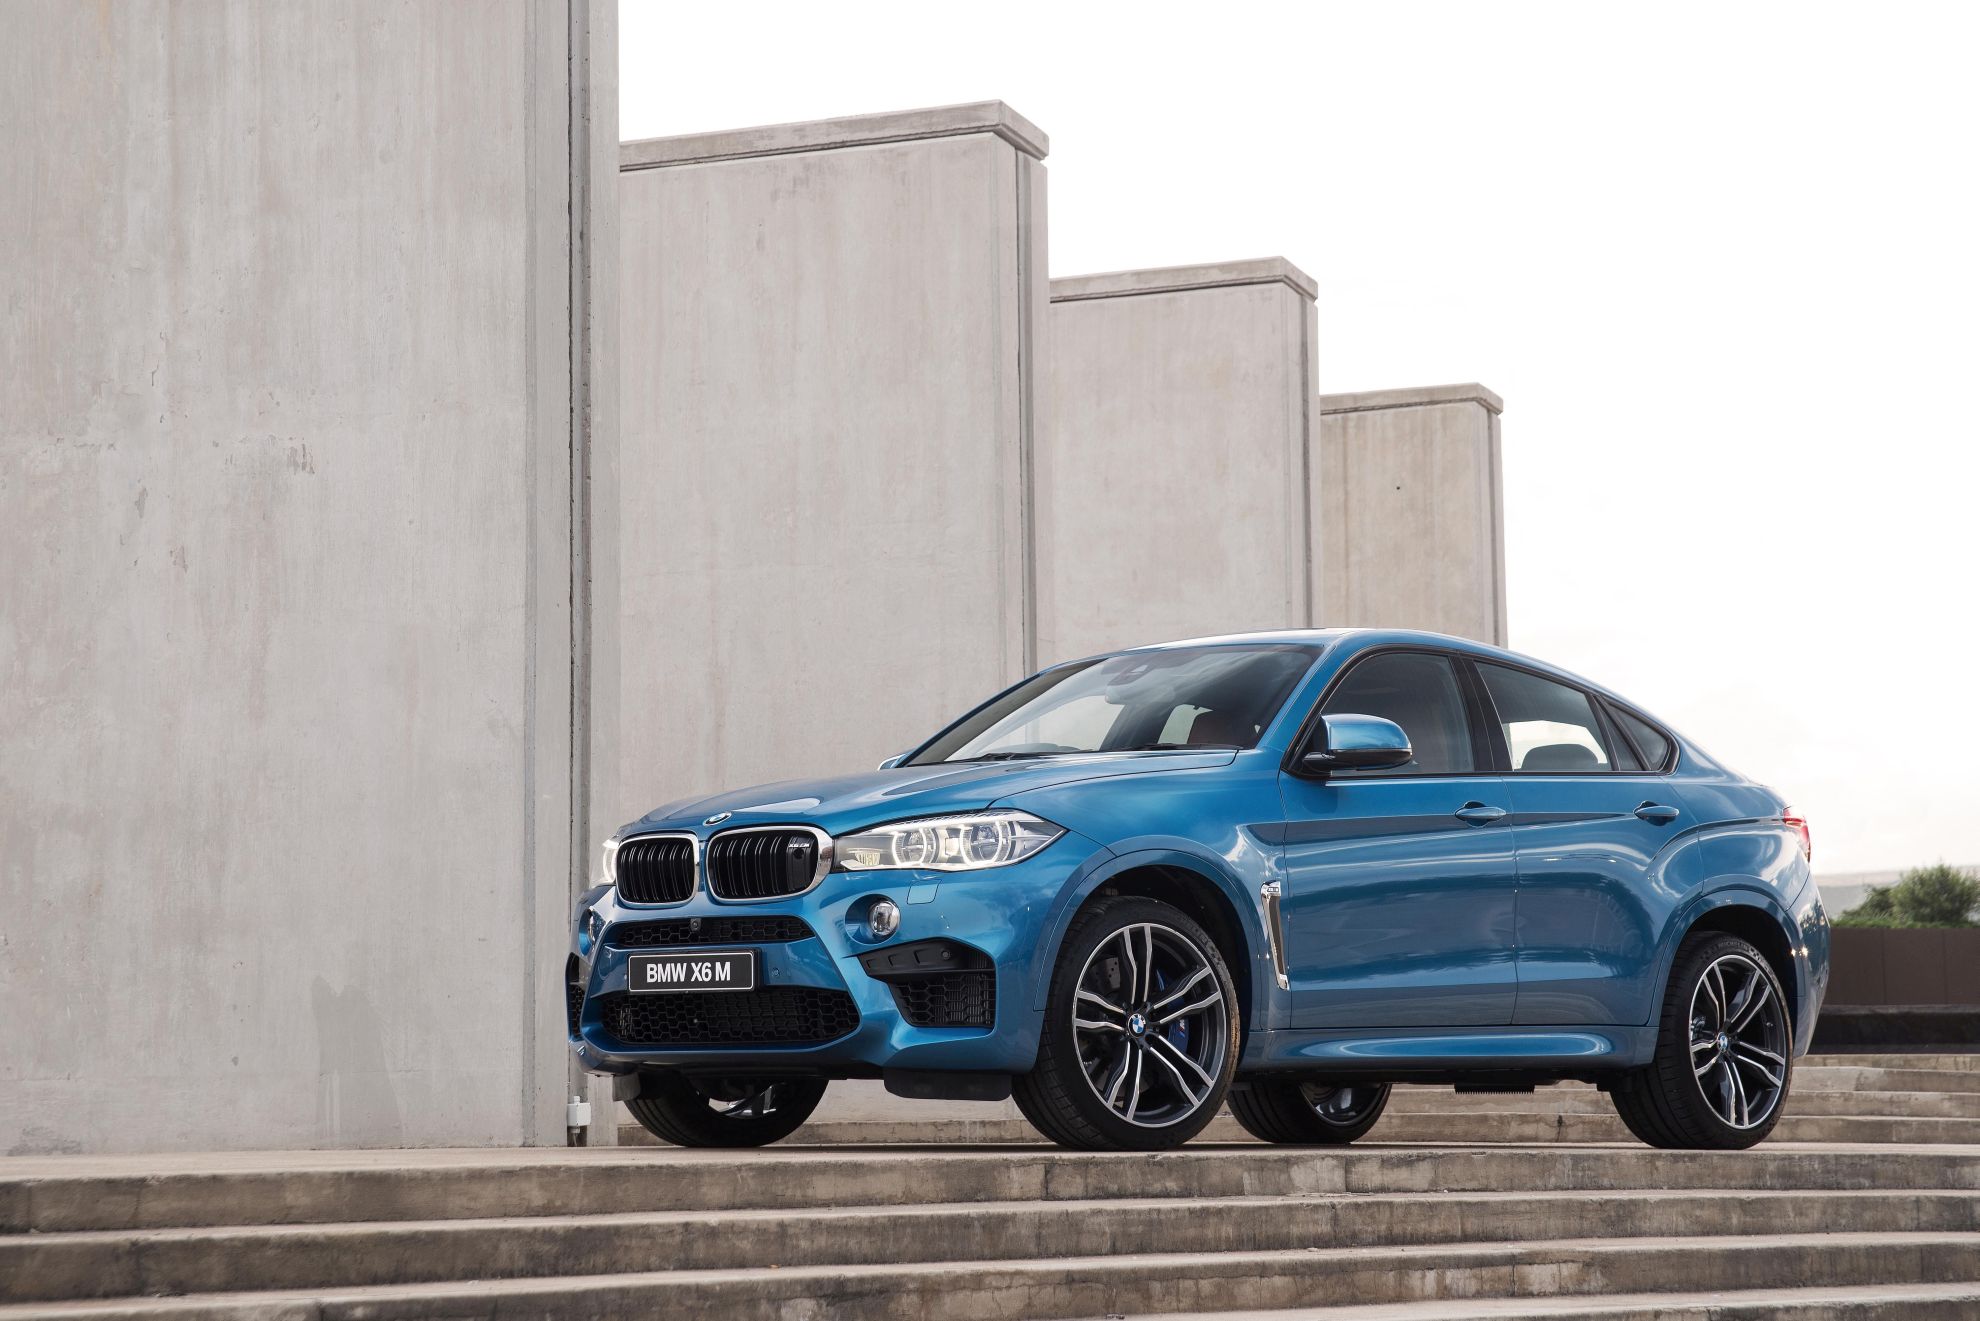 The new BMW X5 M and BMW X6 M now available in South Africa